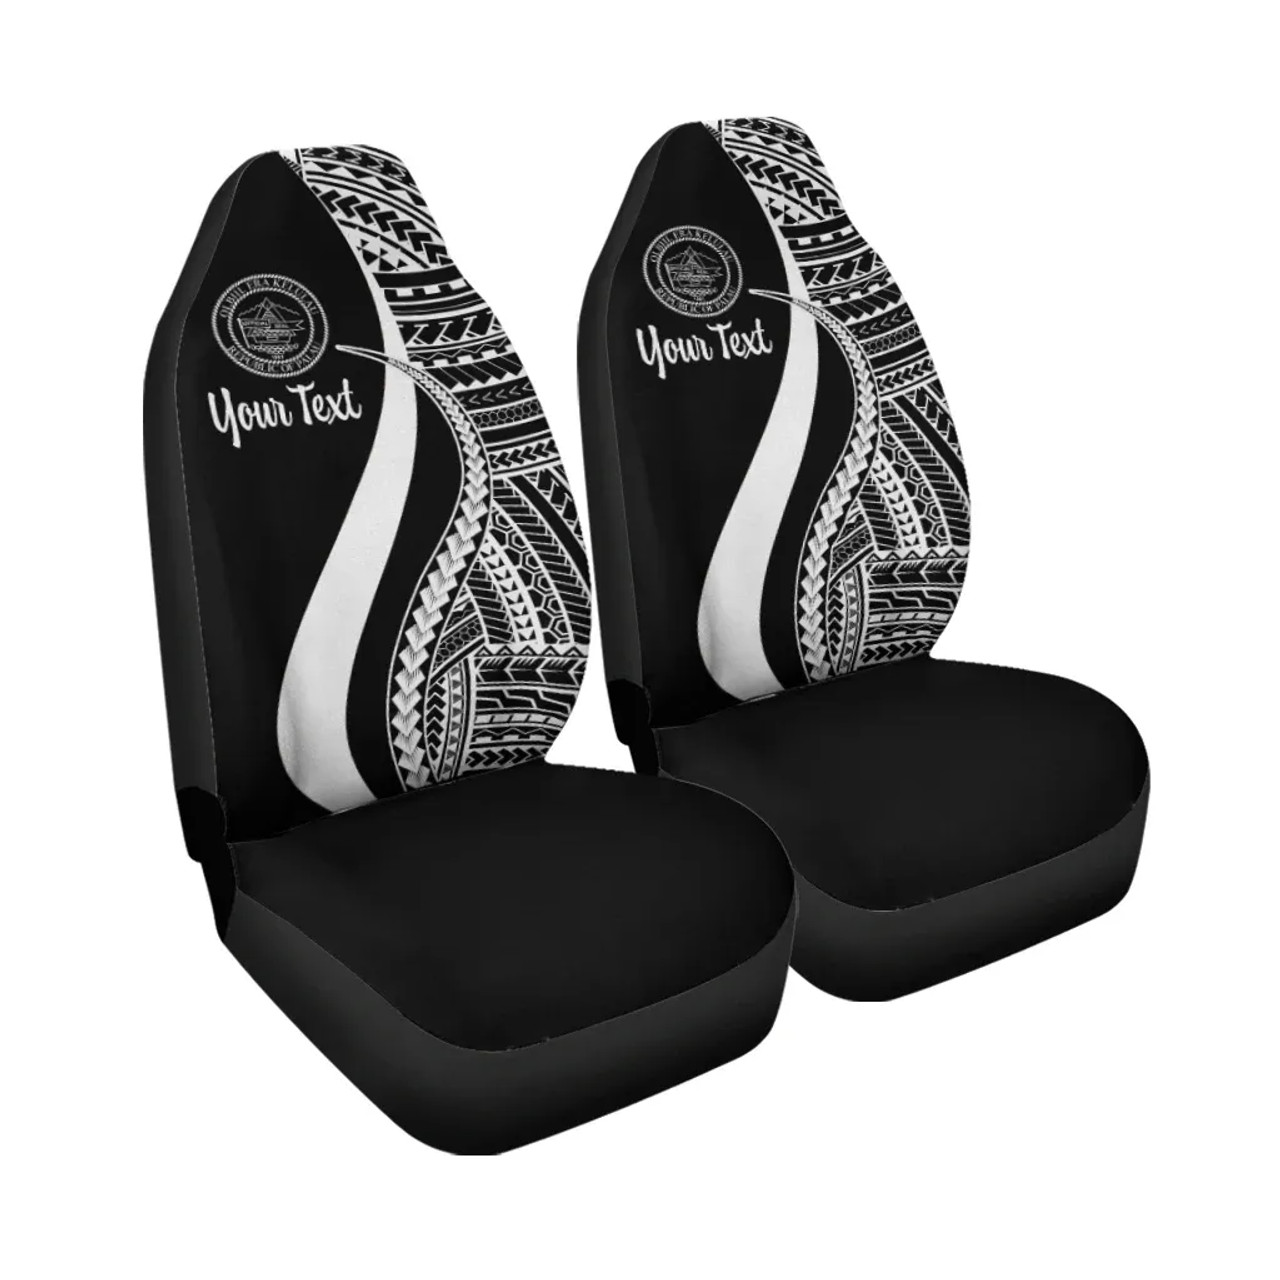 Palau Custom Personalised Car Seat Covers - White Polynesian Tentacle Tribal Pattern Crest